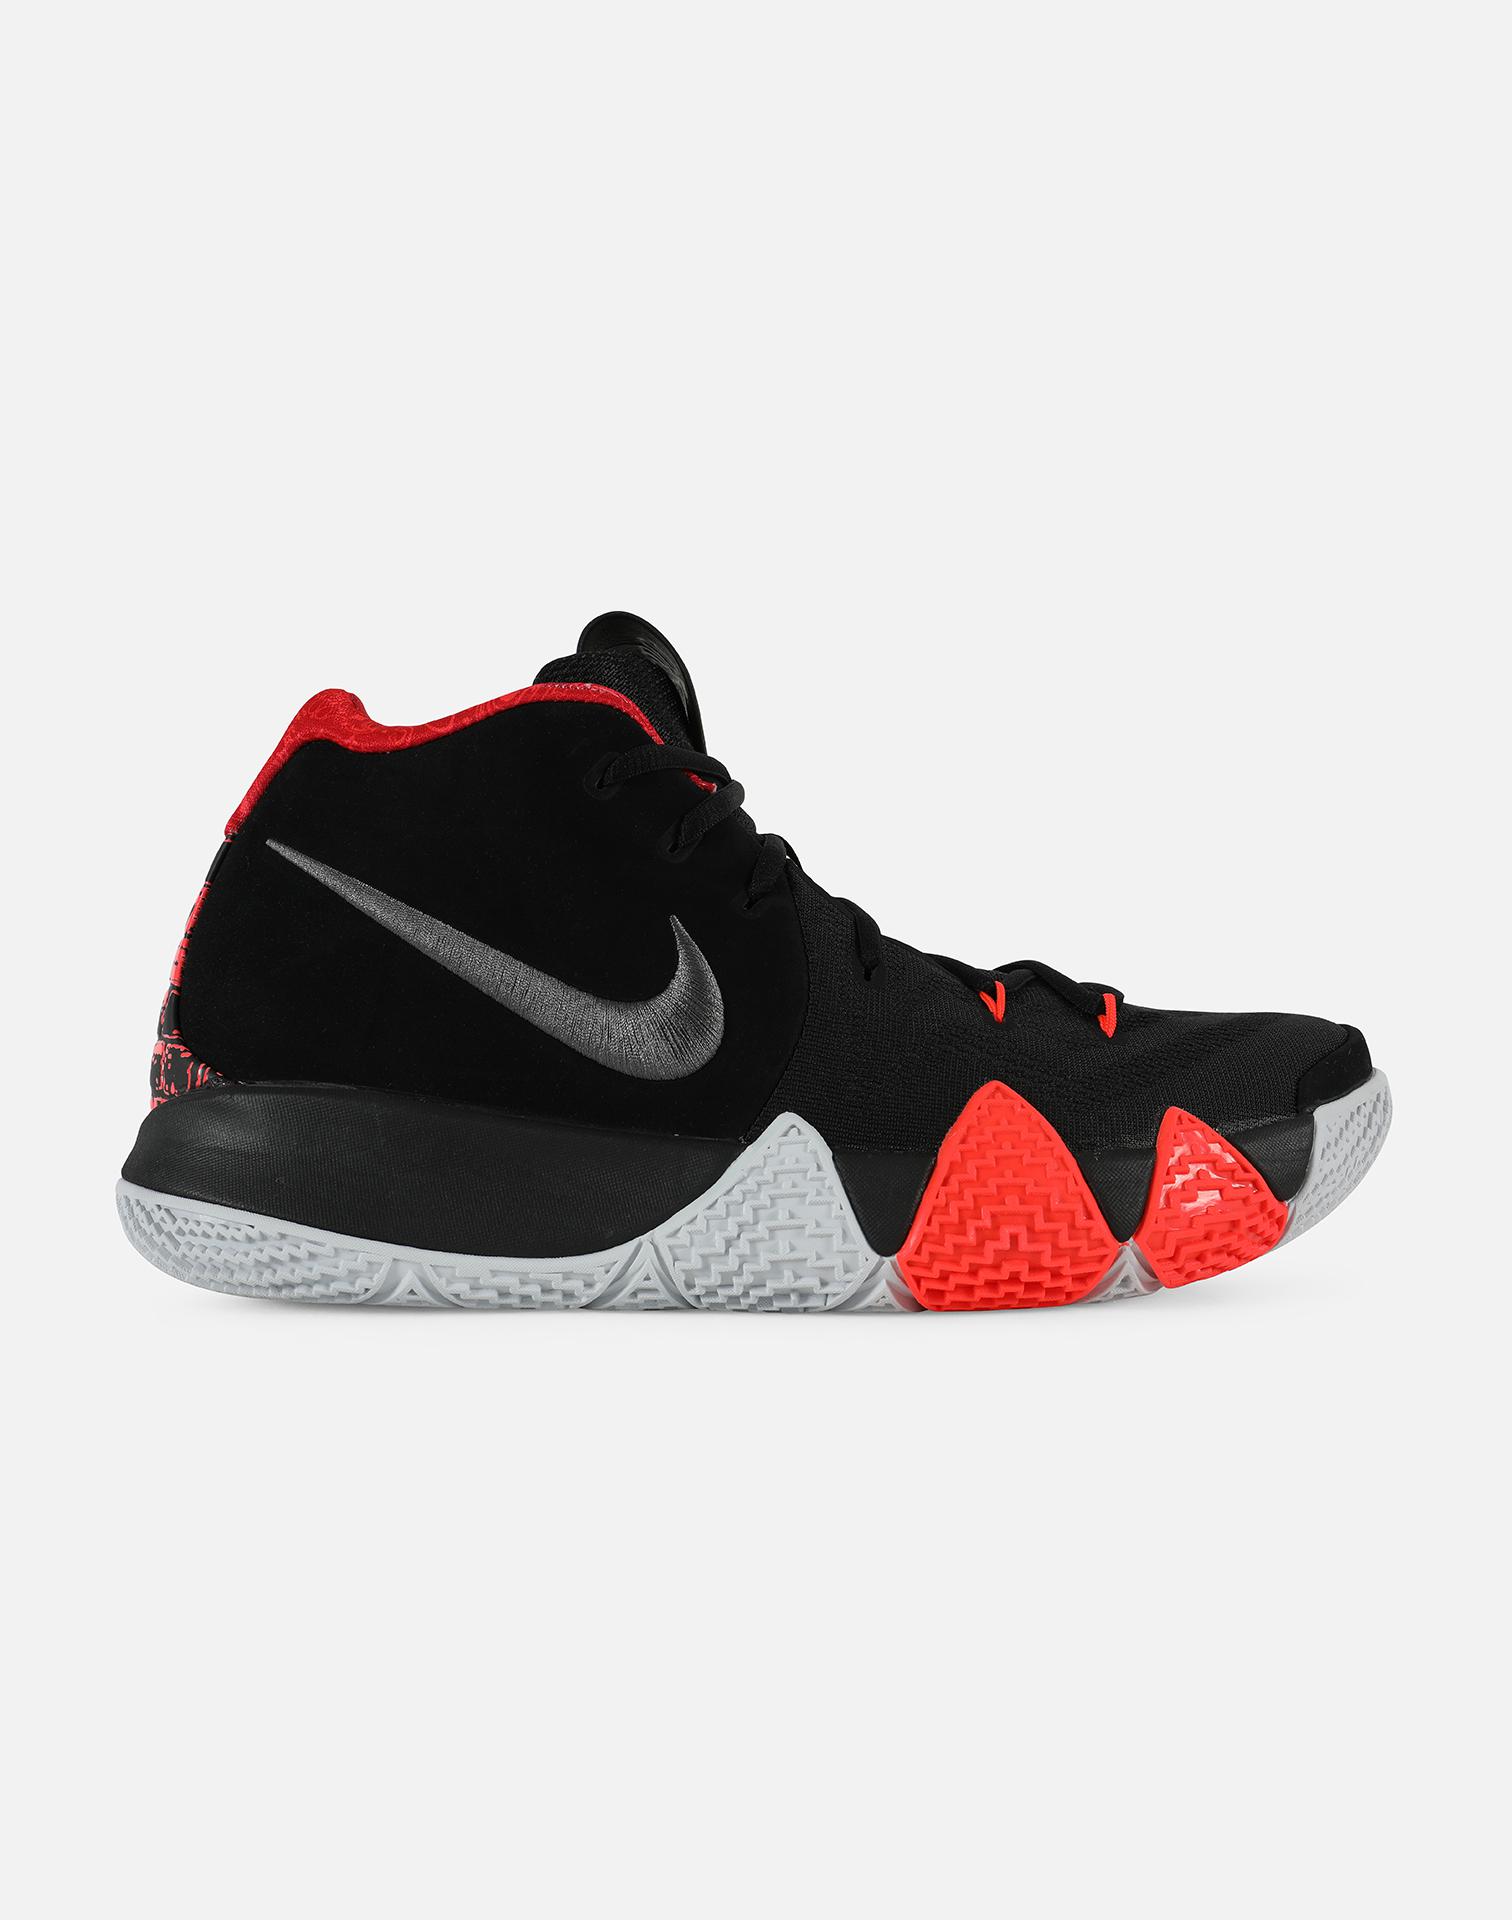 kyrie 4 think 16